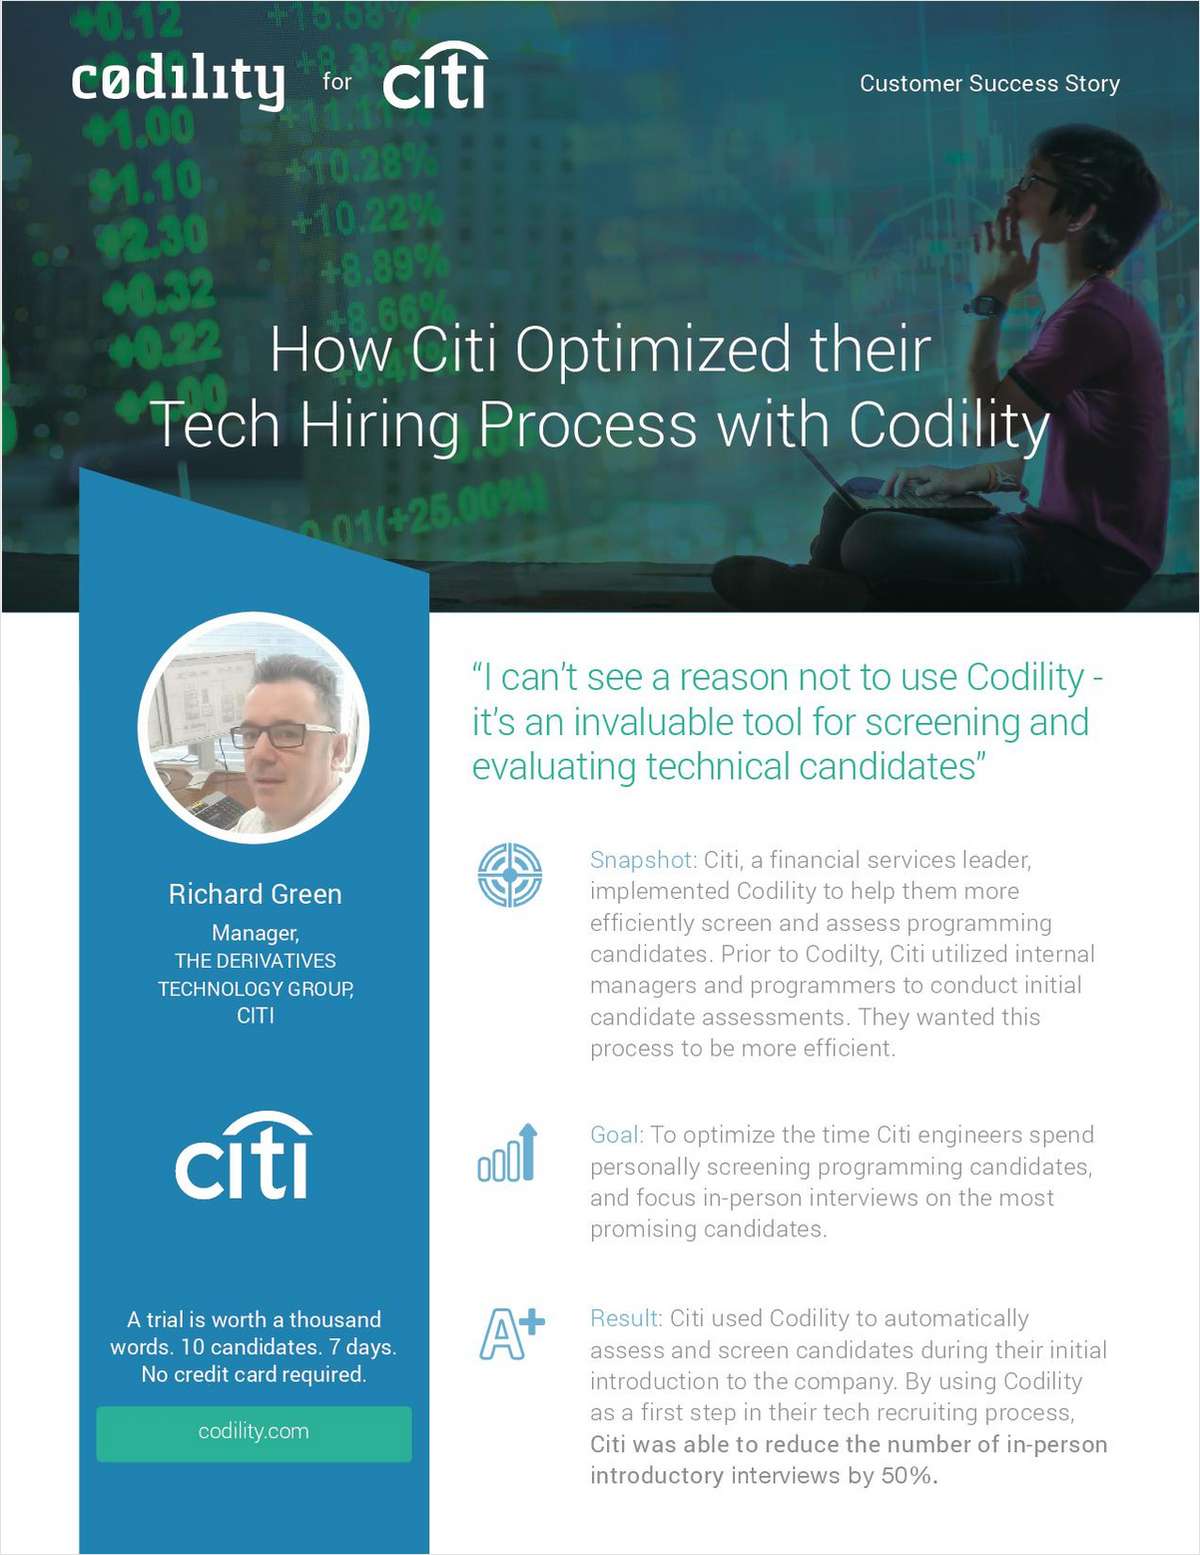 How Citi Optimized their Tech Hiring Process with Codility